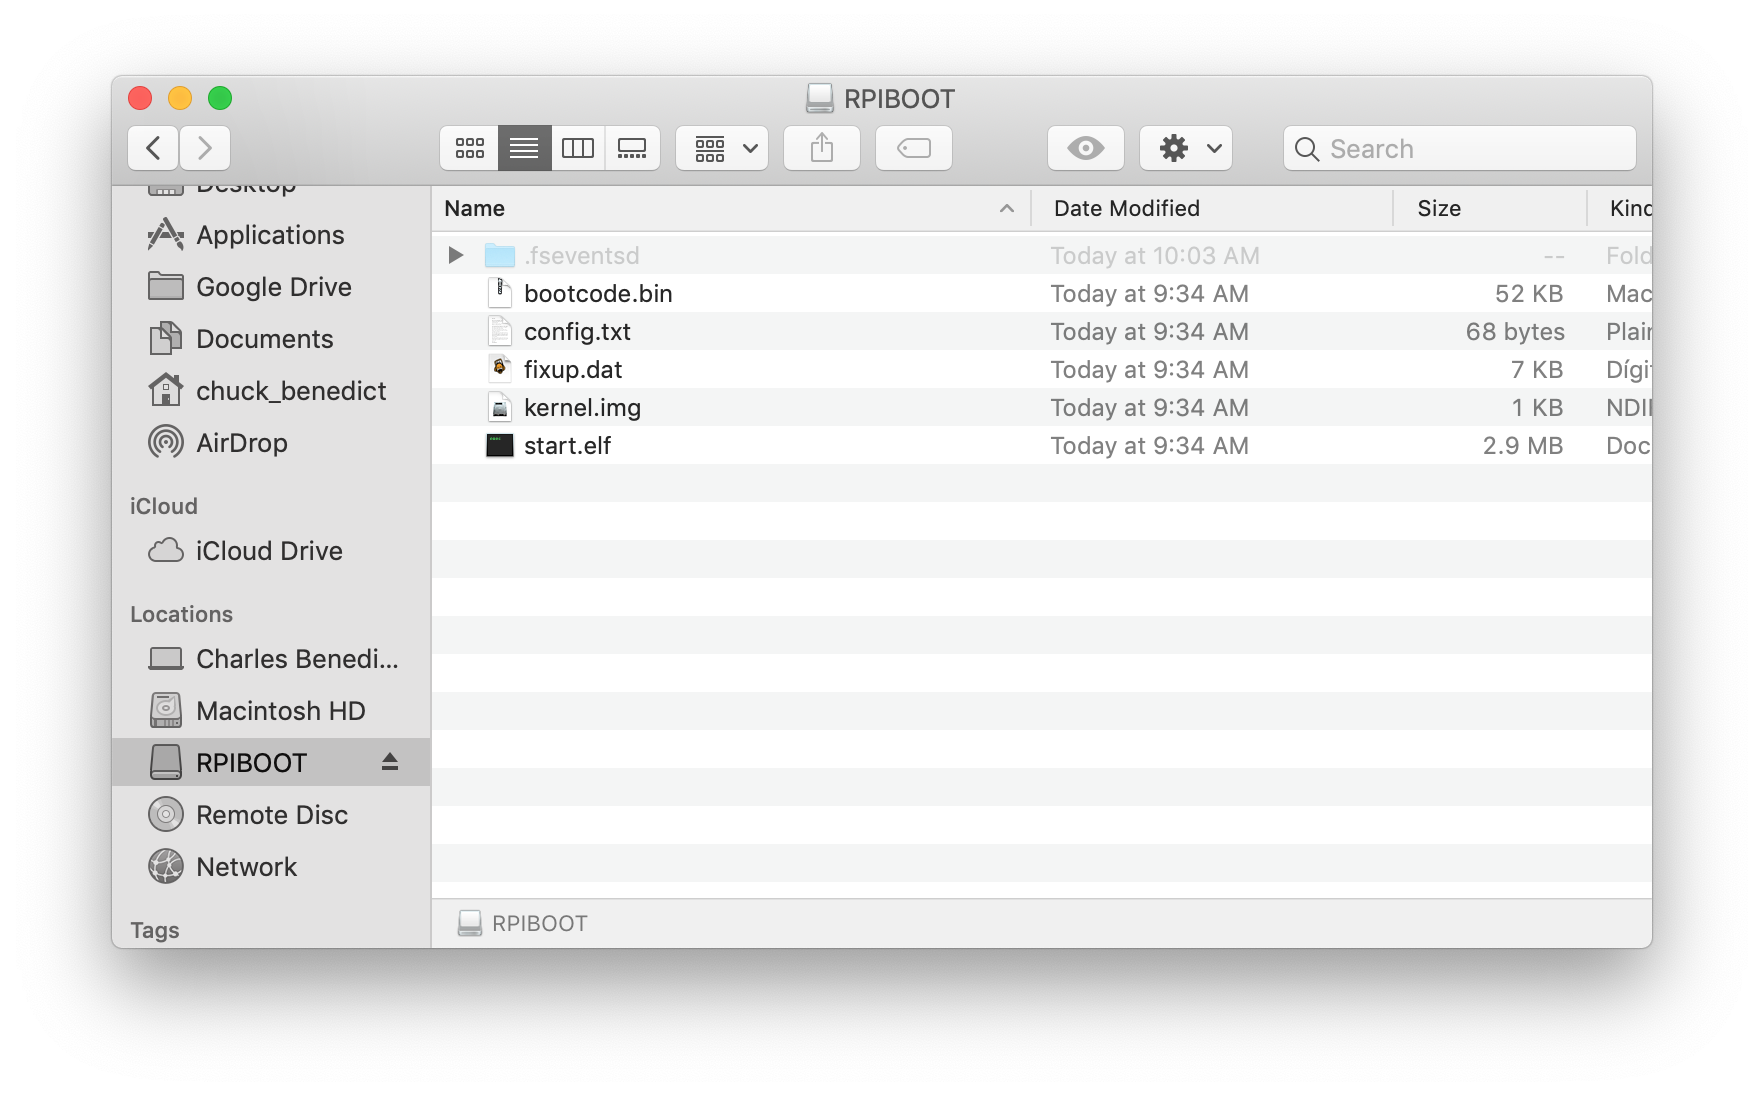 a screen shot of the Finder showing a list of files to boot the Raspberry Pi